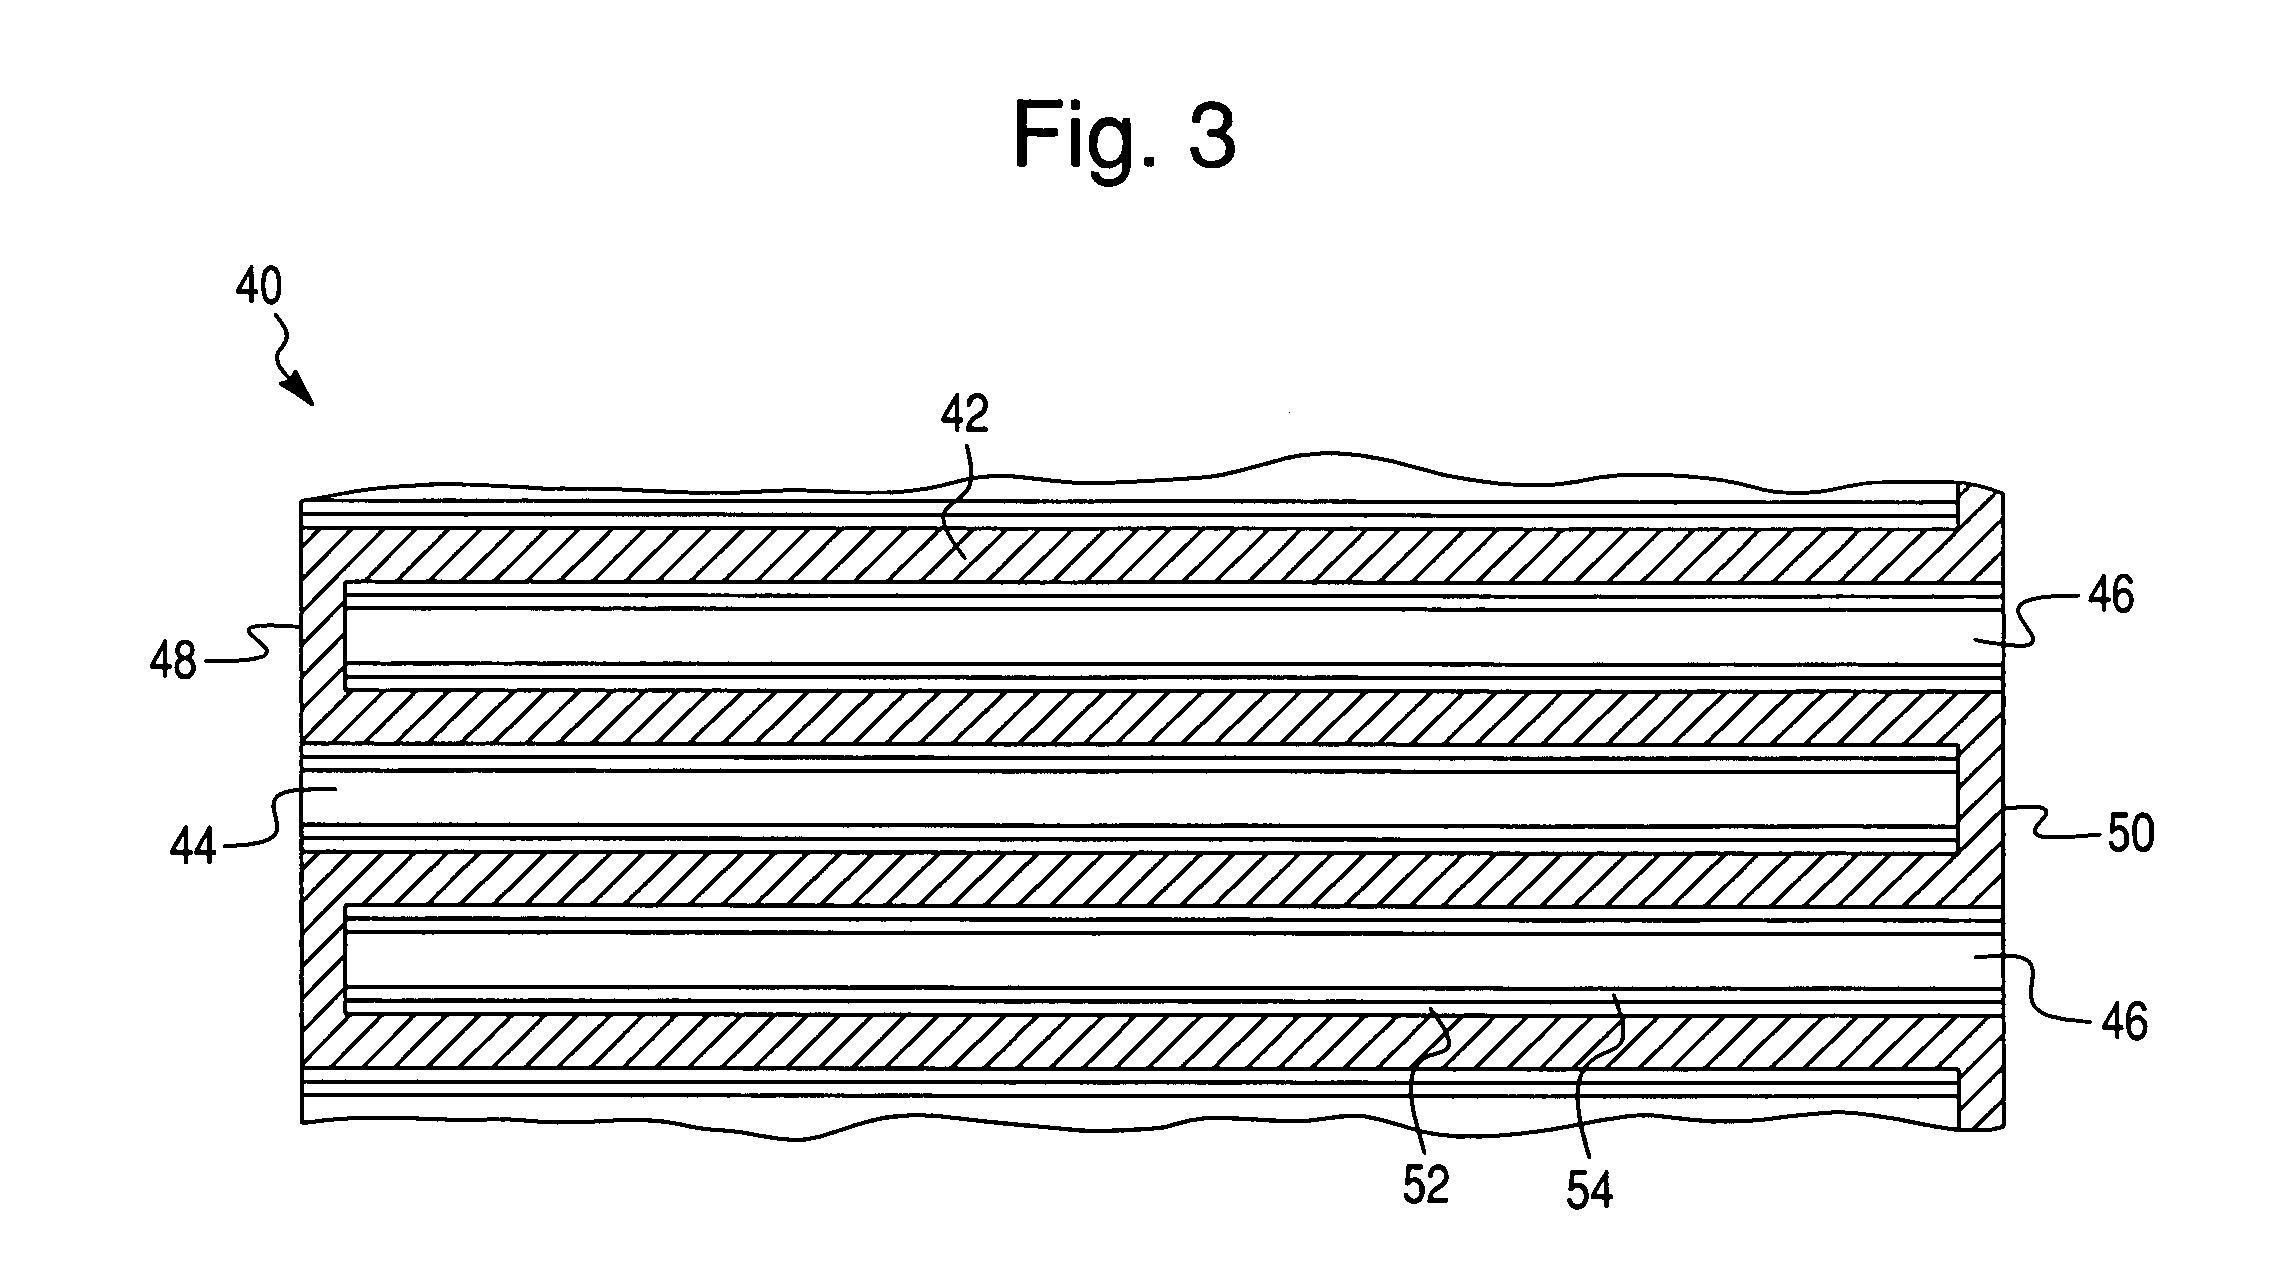 Hydrocarbon adsorpotion method and device for controlling evaporative emissions from the fuel storage system of motor vehicles